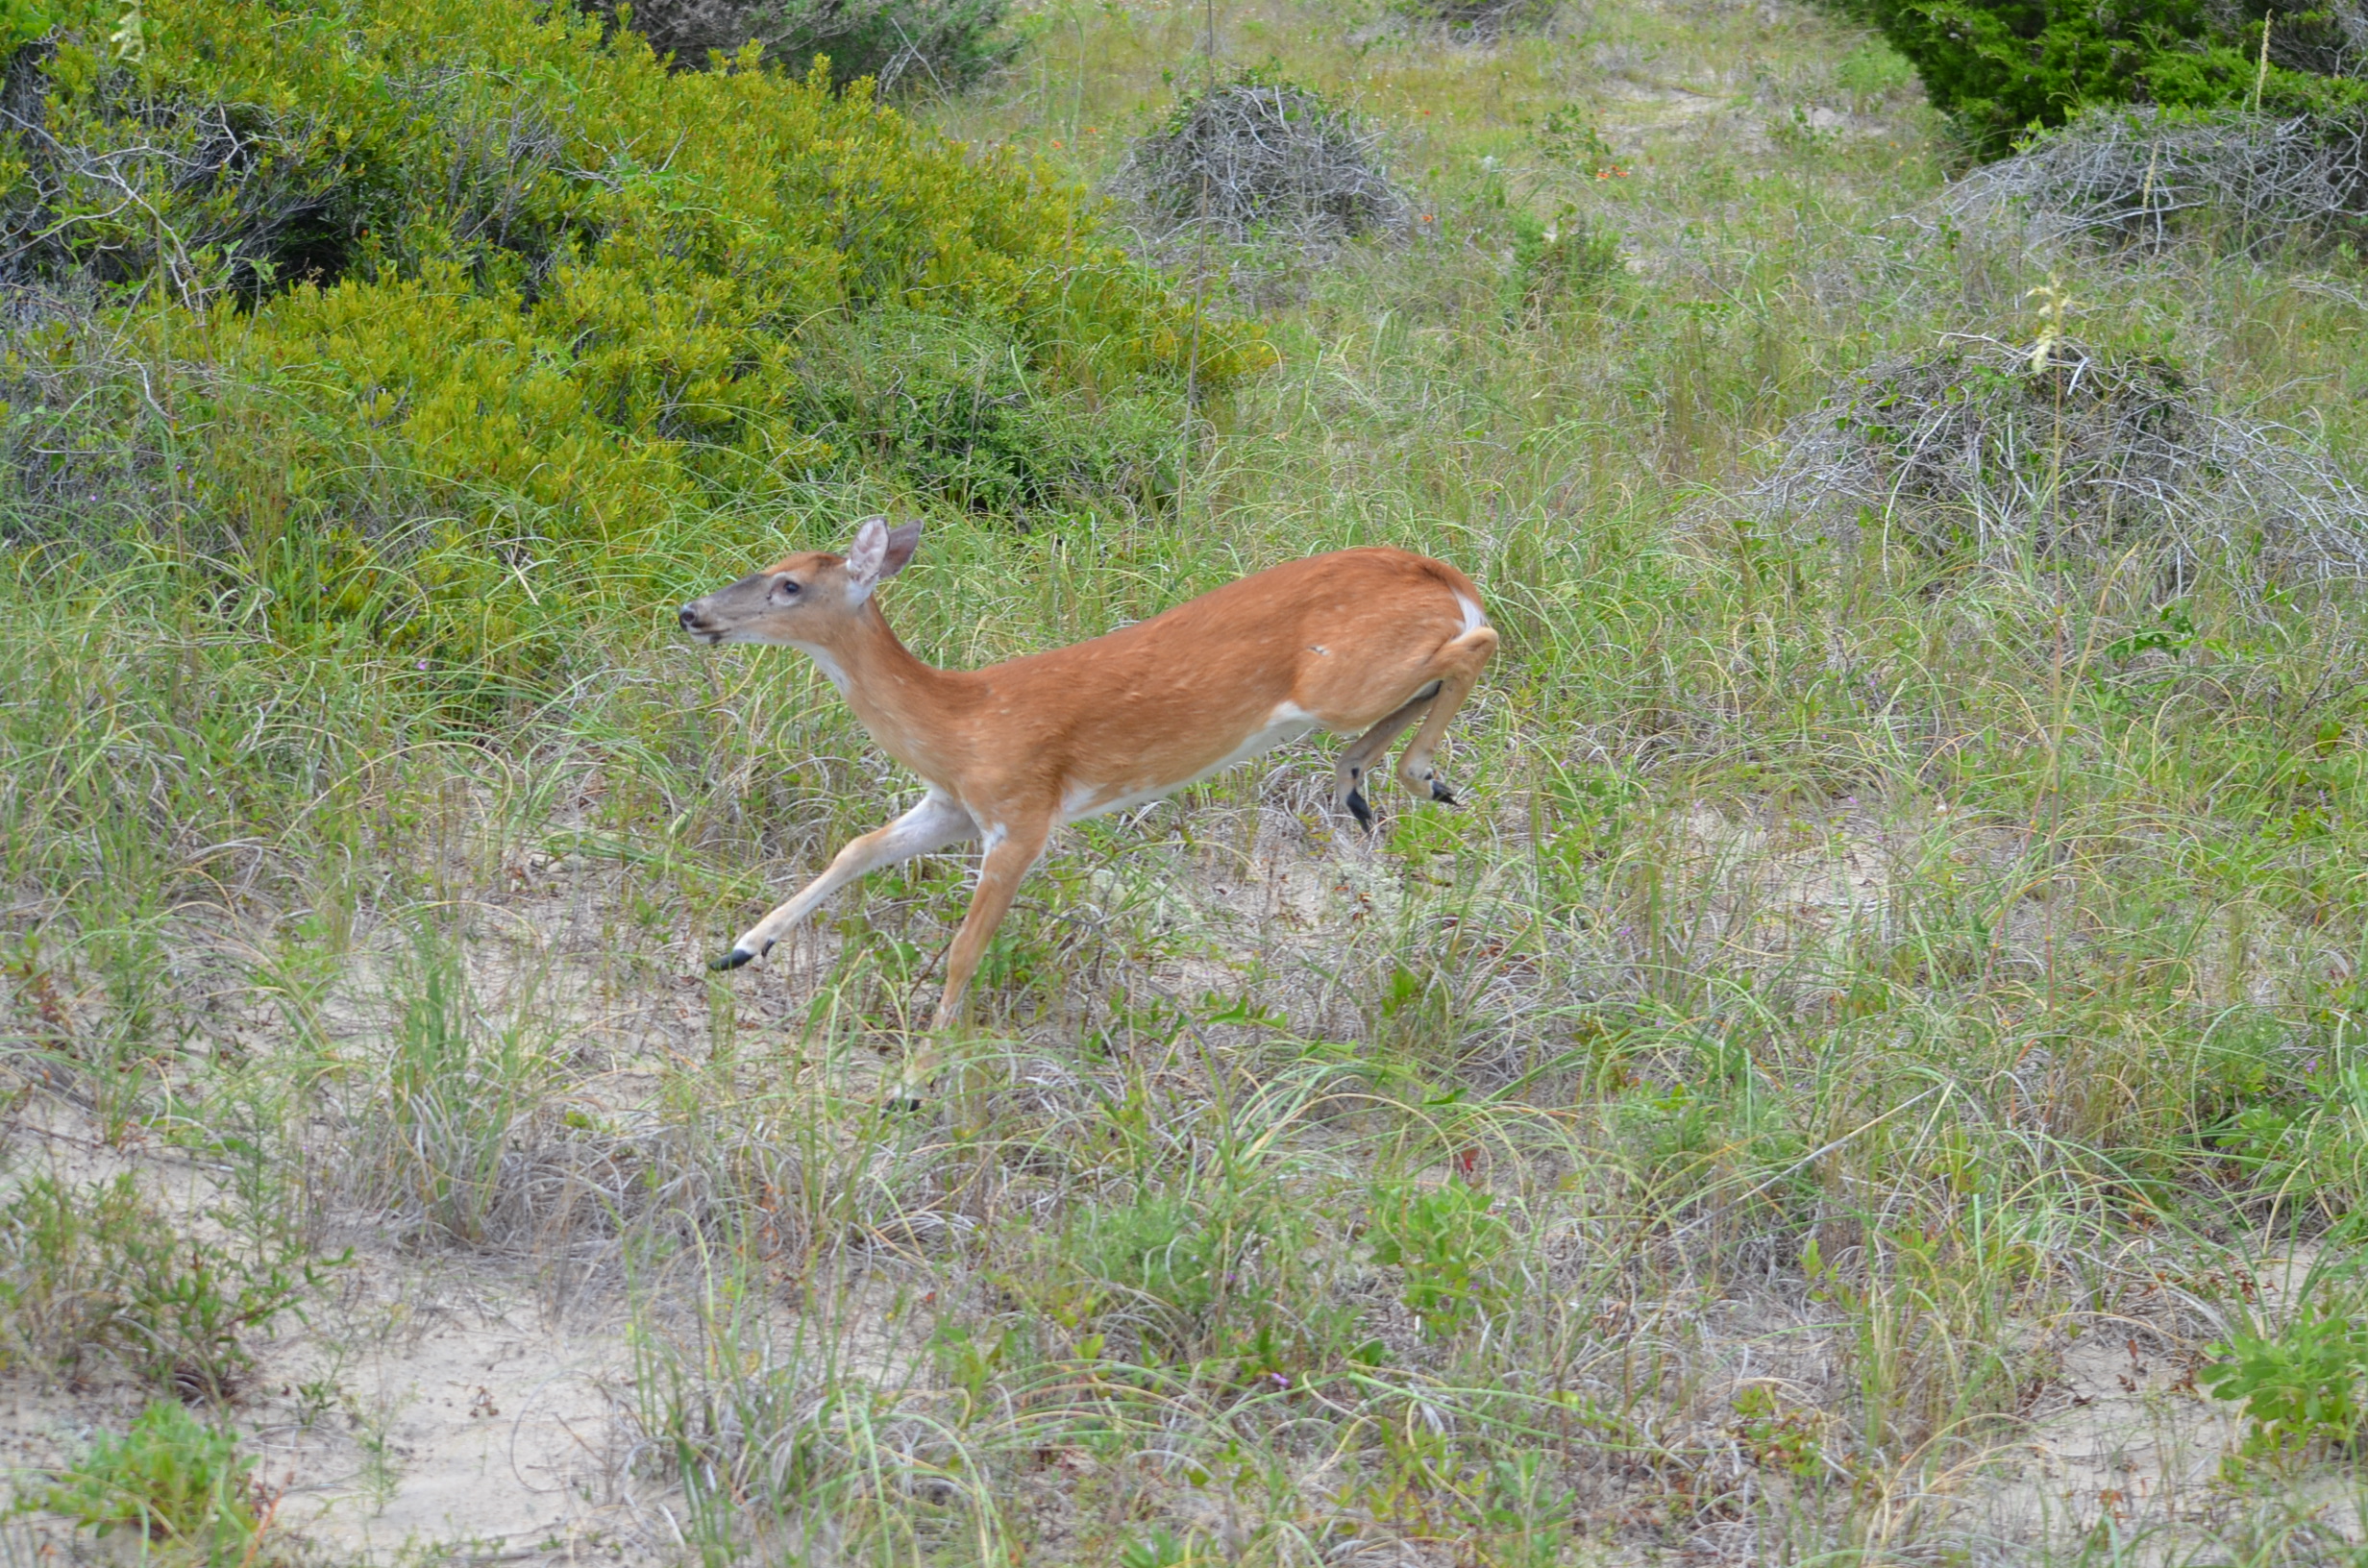 White-tailed deer frolicking behind the primary dune north of Ramp 30 on Hatteras Island.